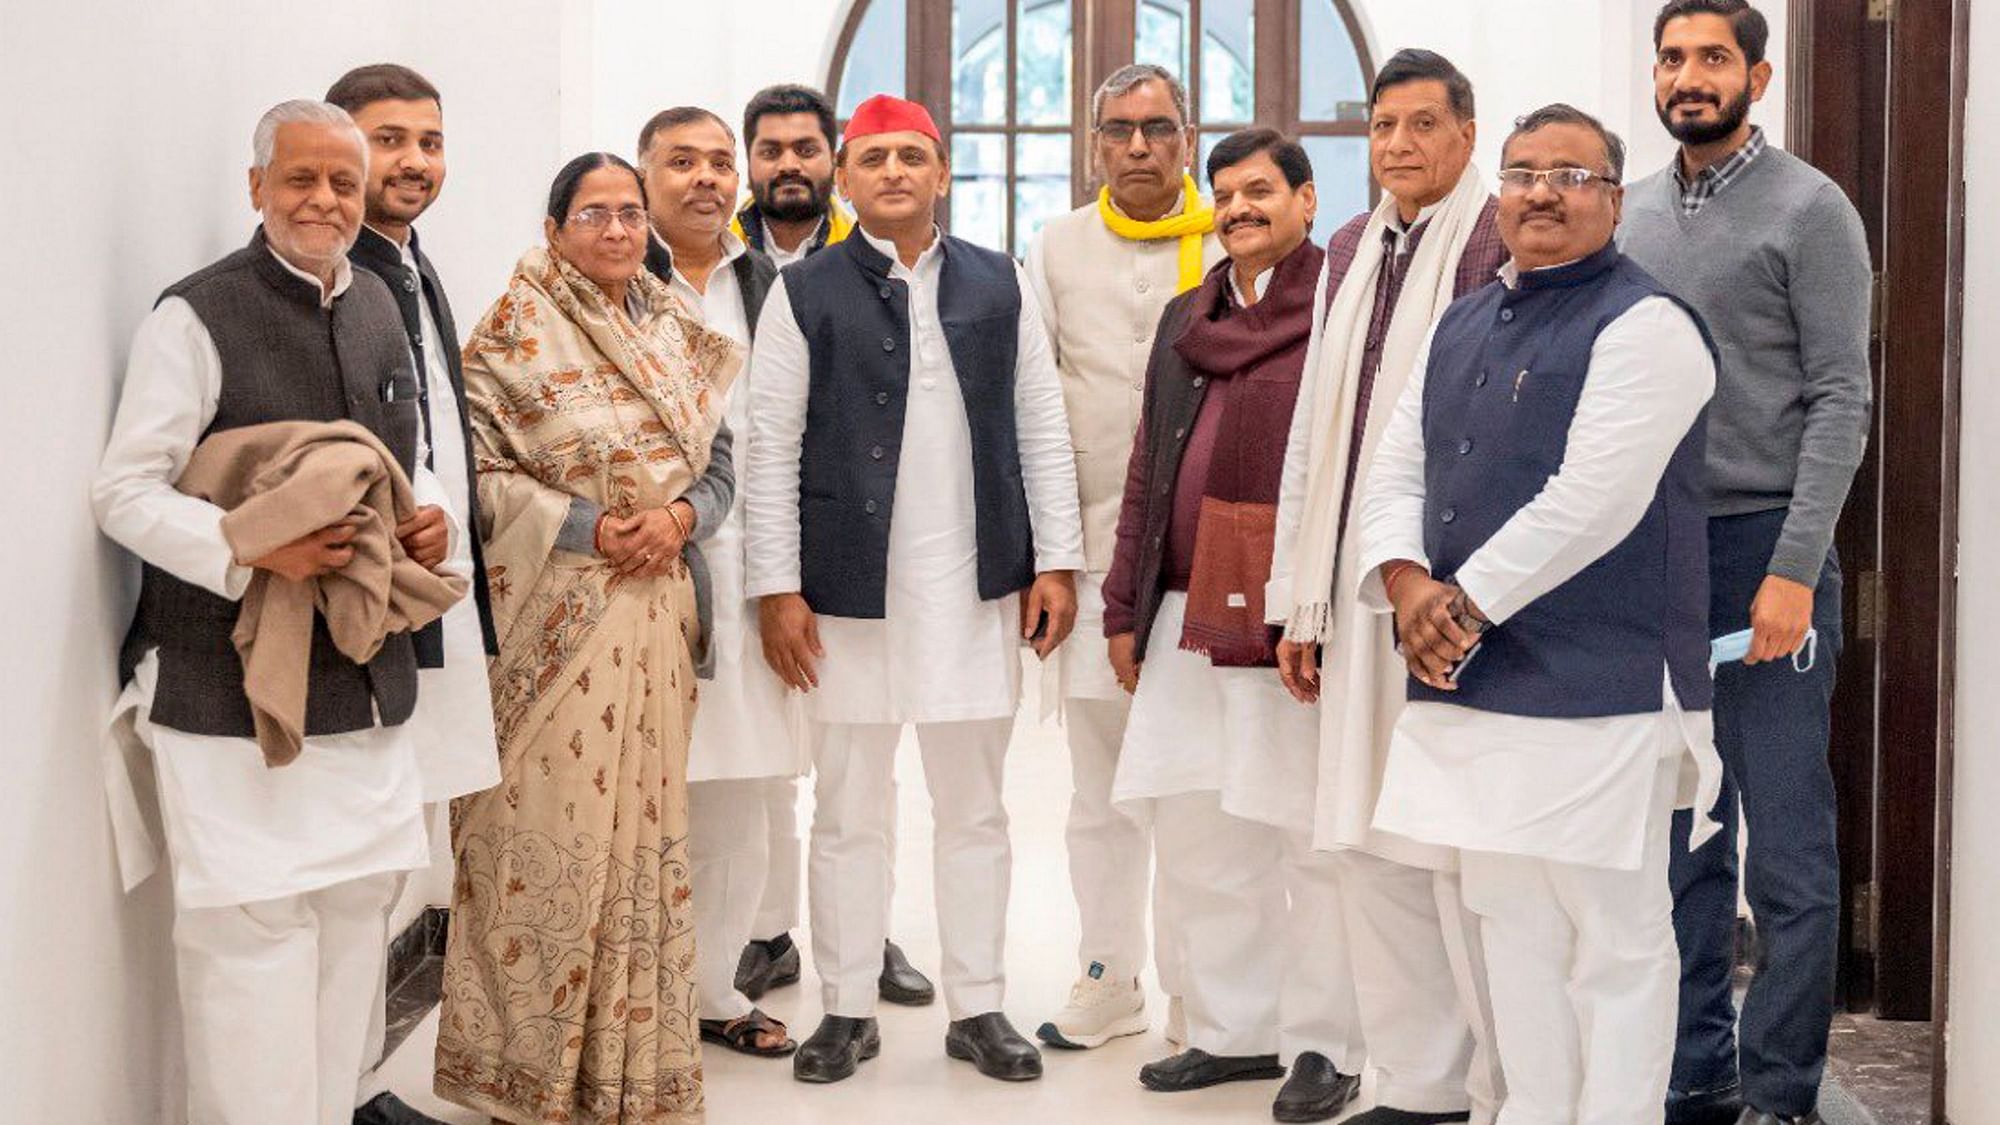 <div class="paragraphs"><p>Ahead of the upcoming Uttar Pradesh Assembly elections, Samajwadi Party President Akhilesh Yadav on Wednesday, 12 January, chaired a meeting with leaders of the party's allies in Lucknow.</p></div>